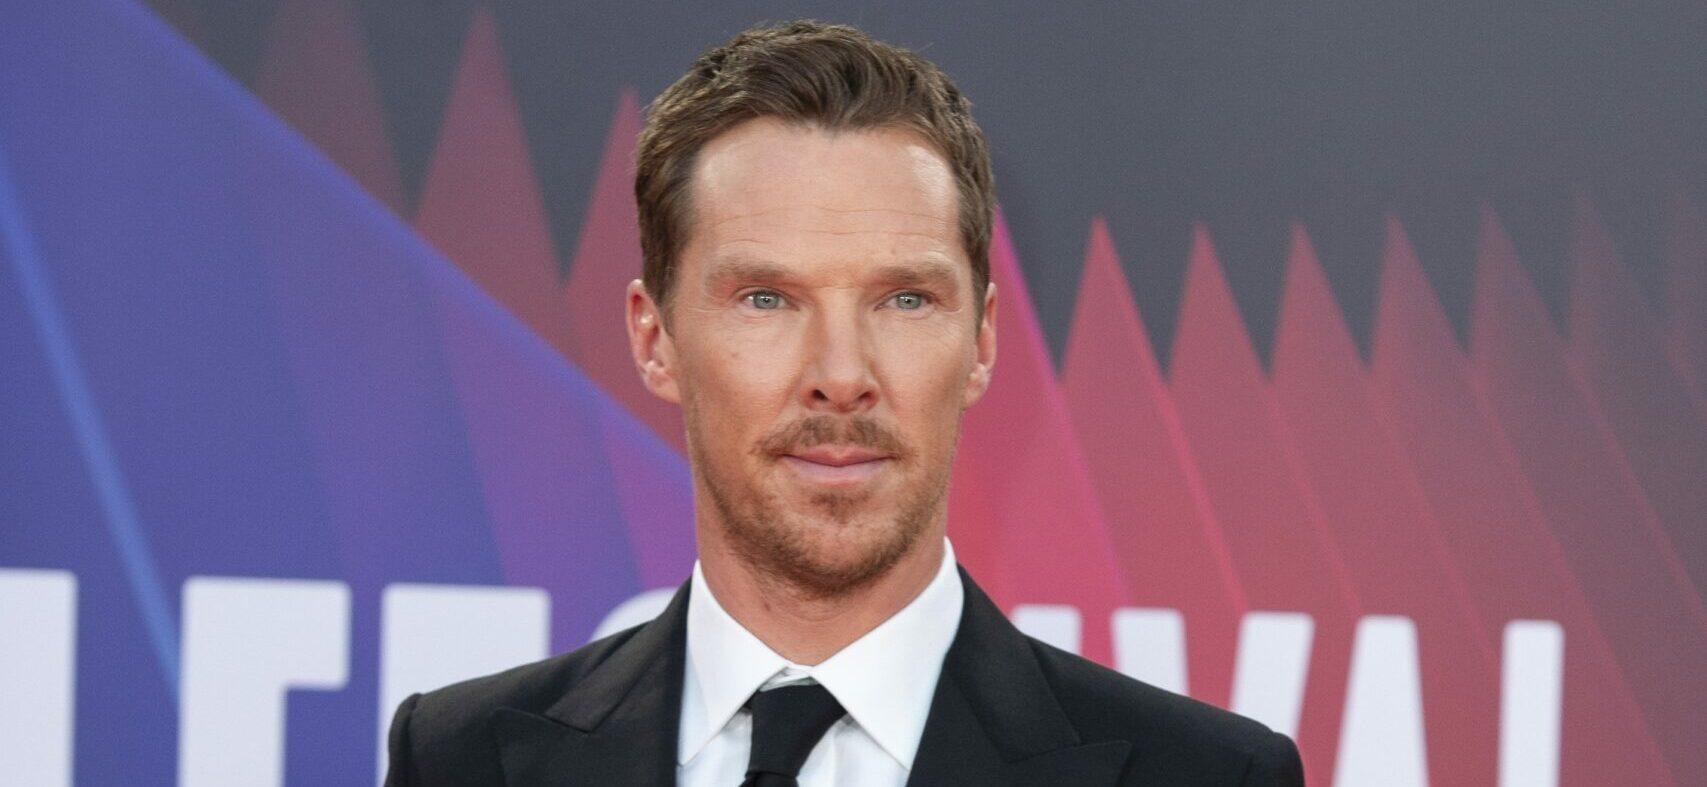 Benedict Cumberbatch at The Power of the Dog Film Premiere